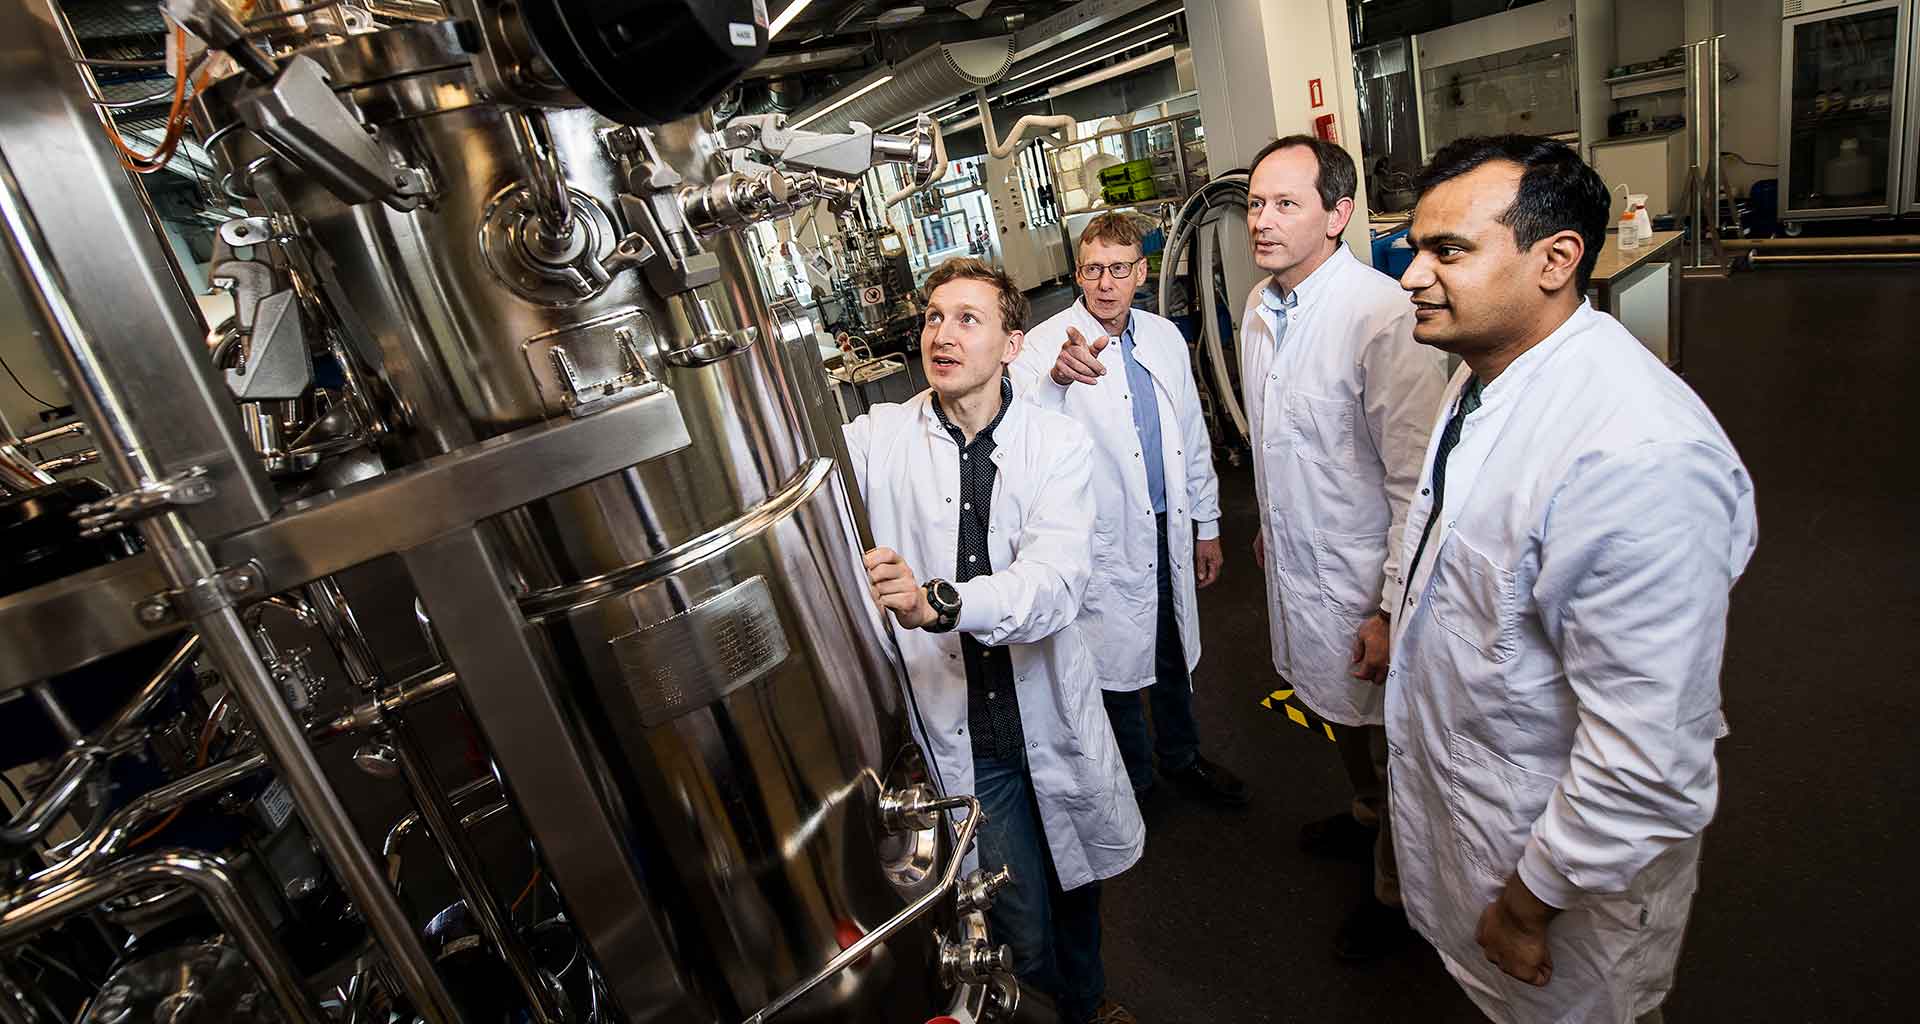 "Researchers in front of laboratory equipment at the Novo Nordisk Foundation Center for Biosustainability at DTU. Photo: Joachim Rode"